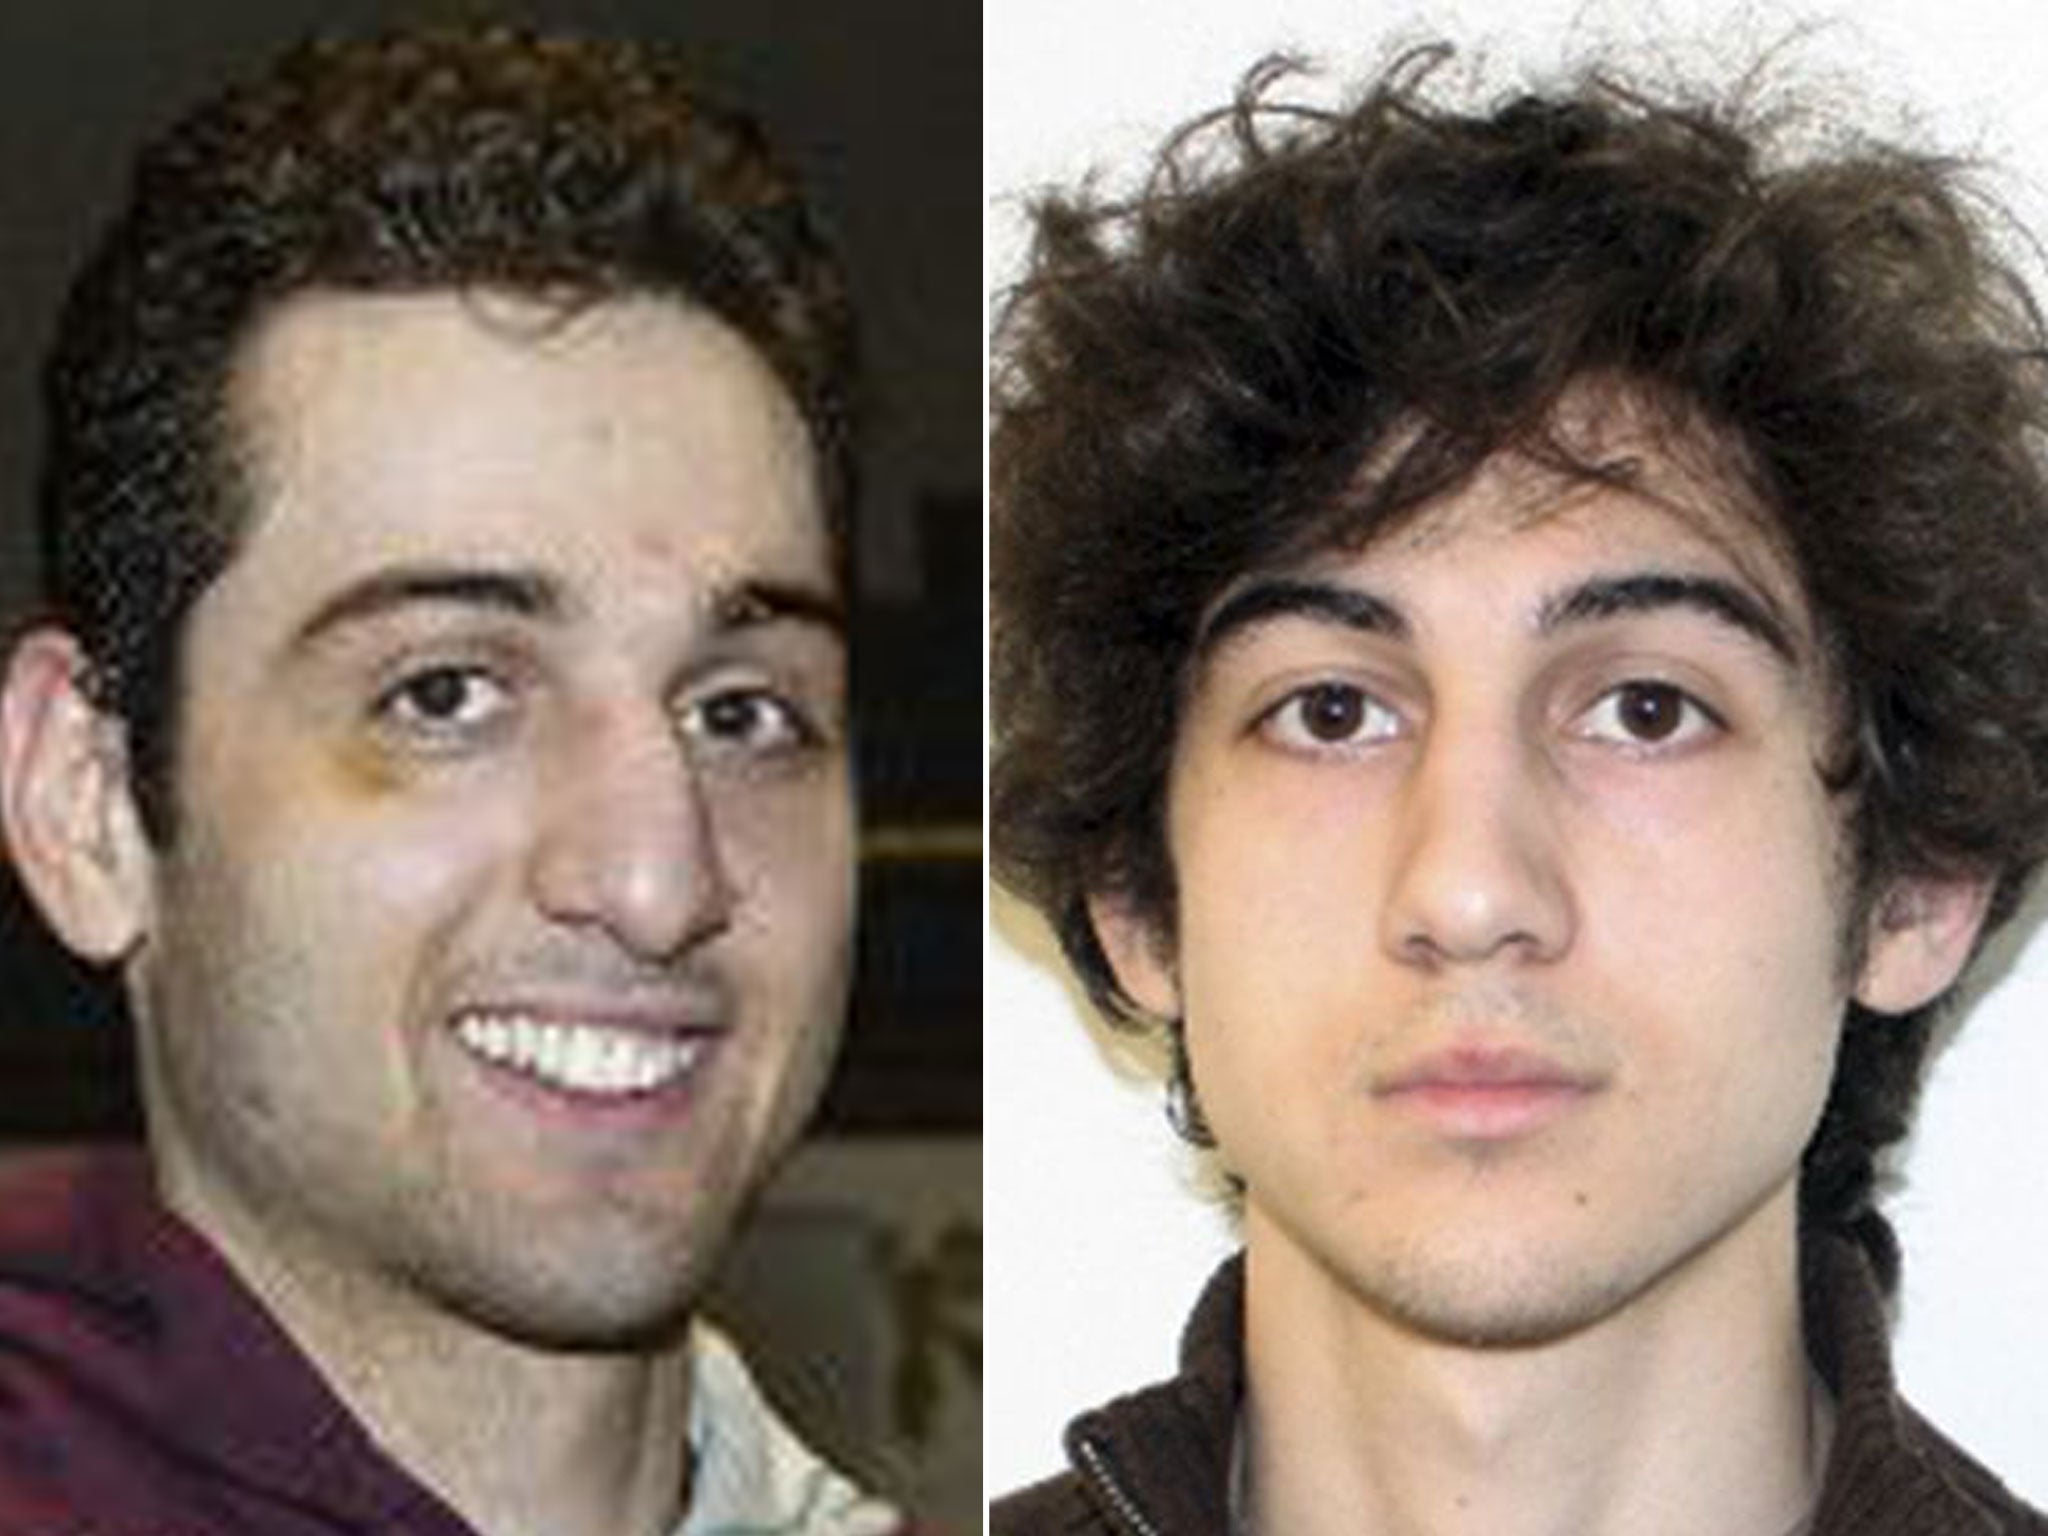 Boston brothers Tamerlan and Dzhokhar Tsarnaev had planned 4 July attack, says official The Independent The Independent